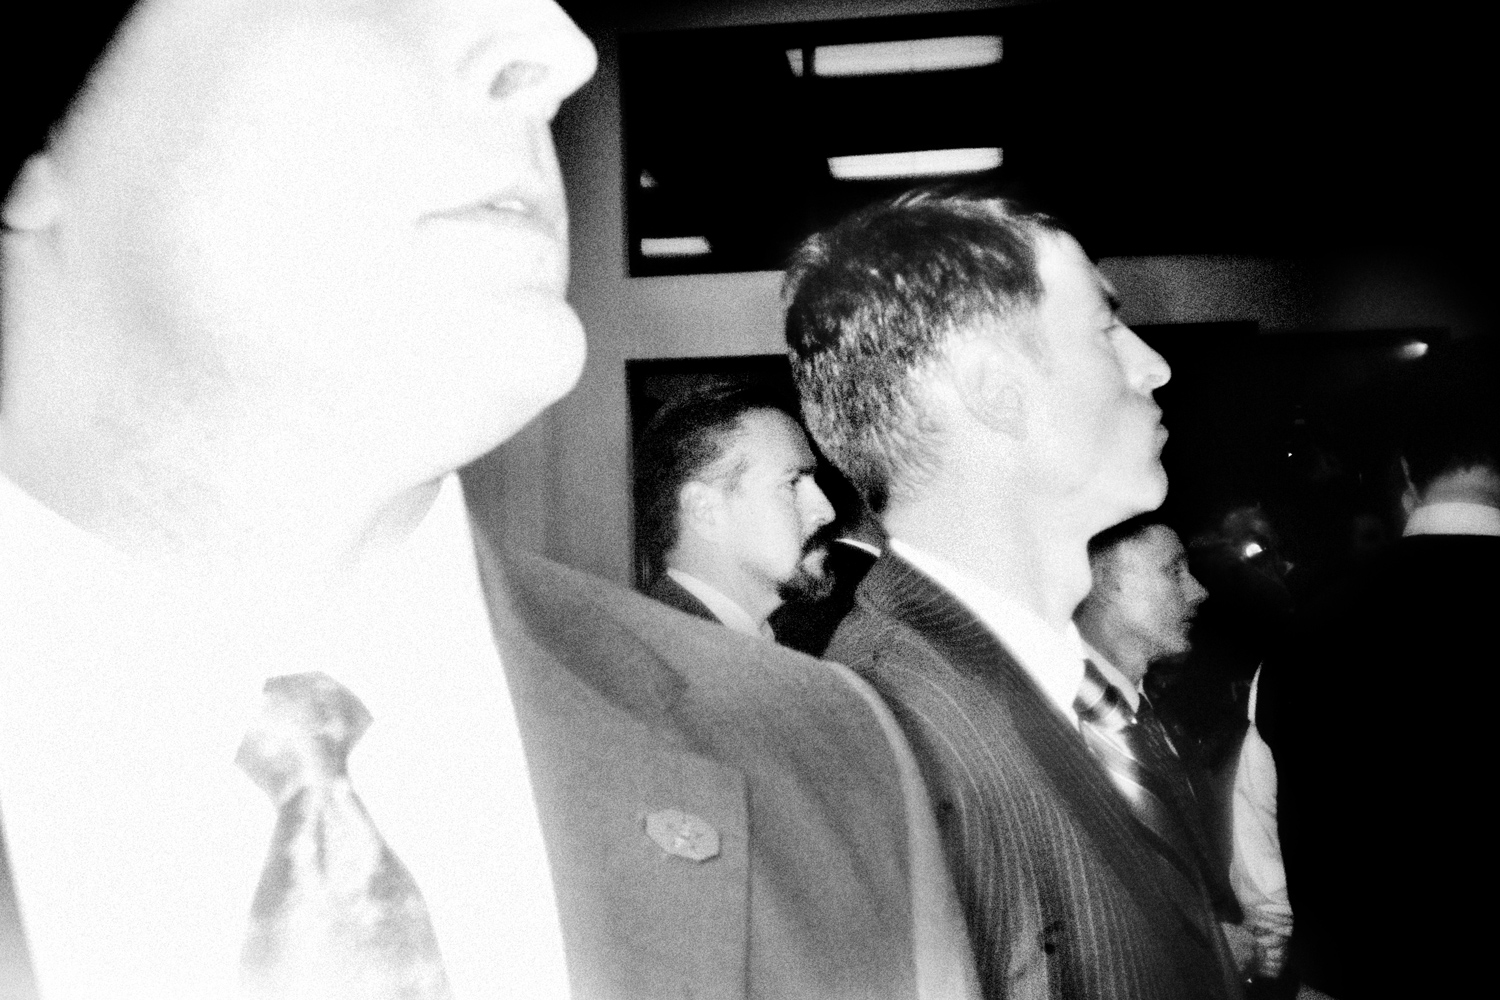 March 5, 2012. Secret service agents watch Rick Santorum as he greets supporters after speaking at a rally in Cuyahoga Falls, Ohio.